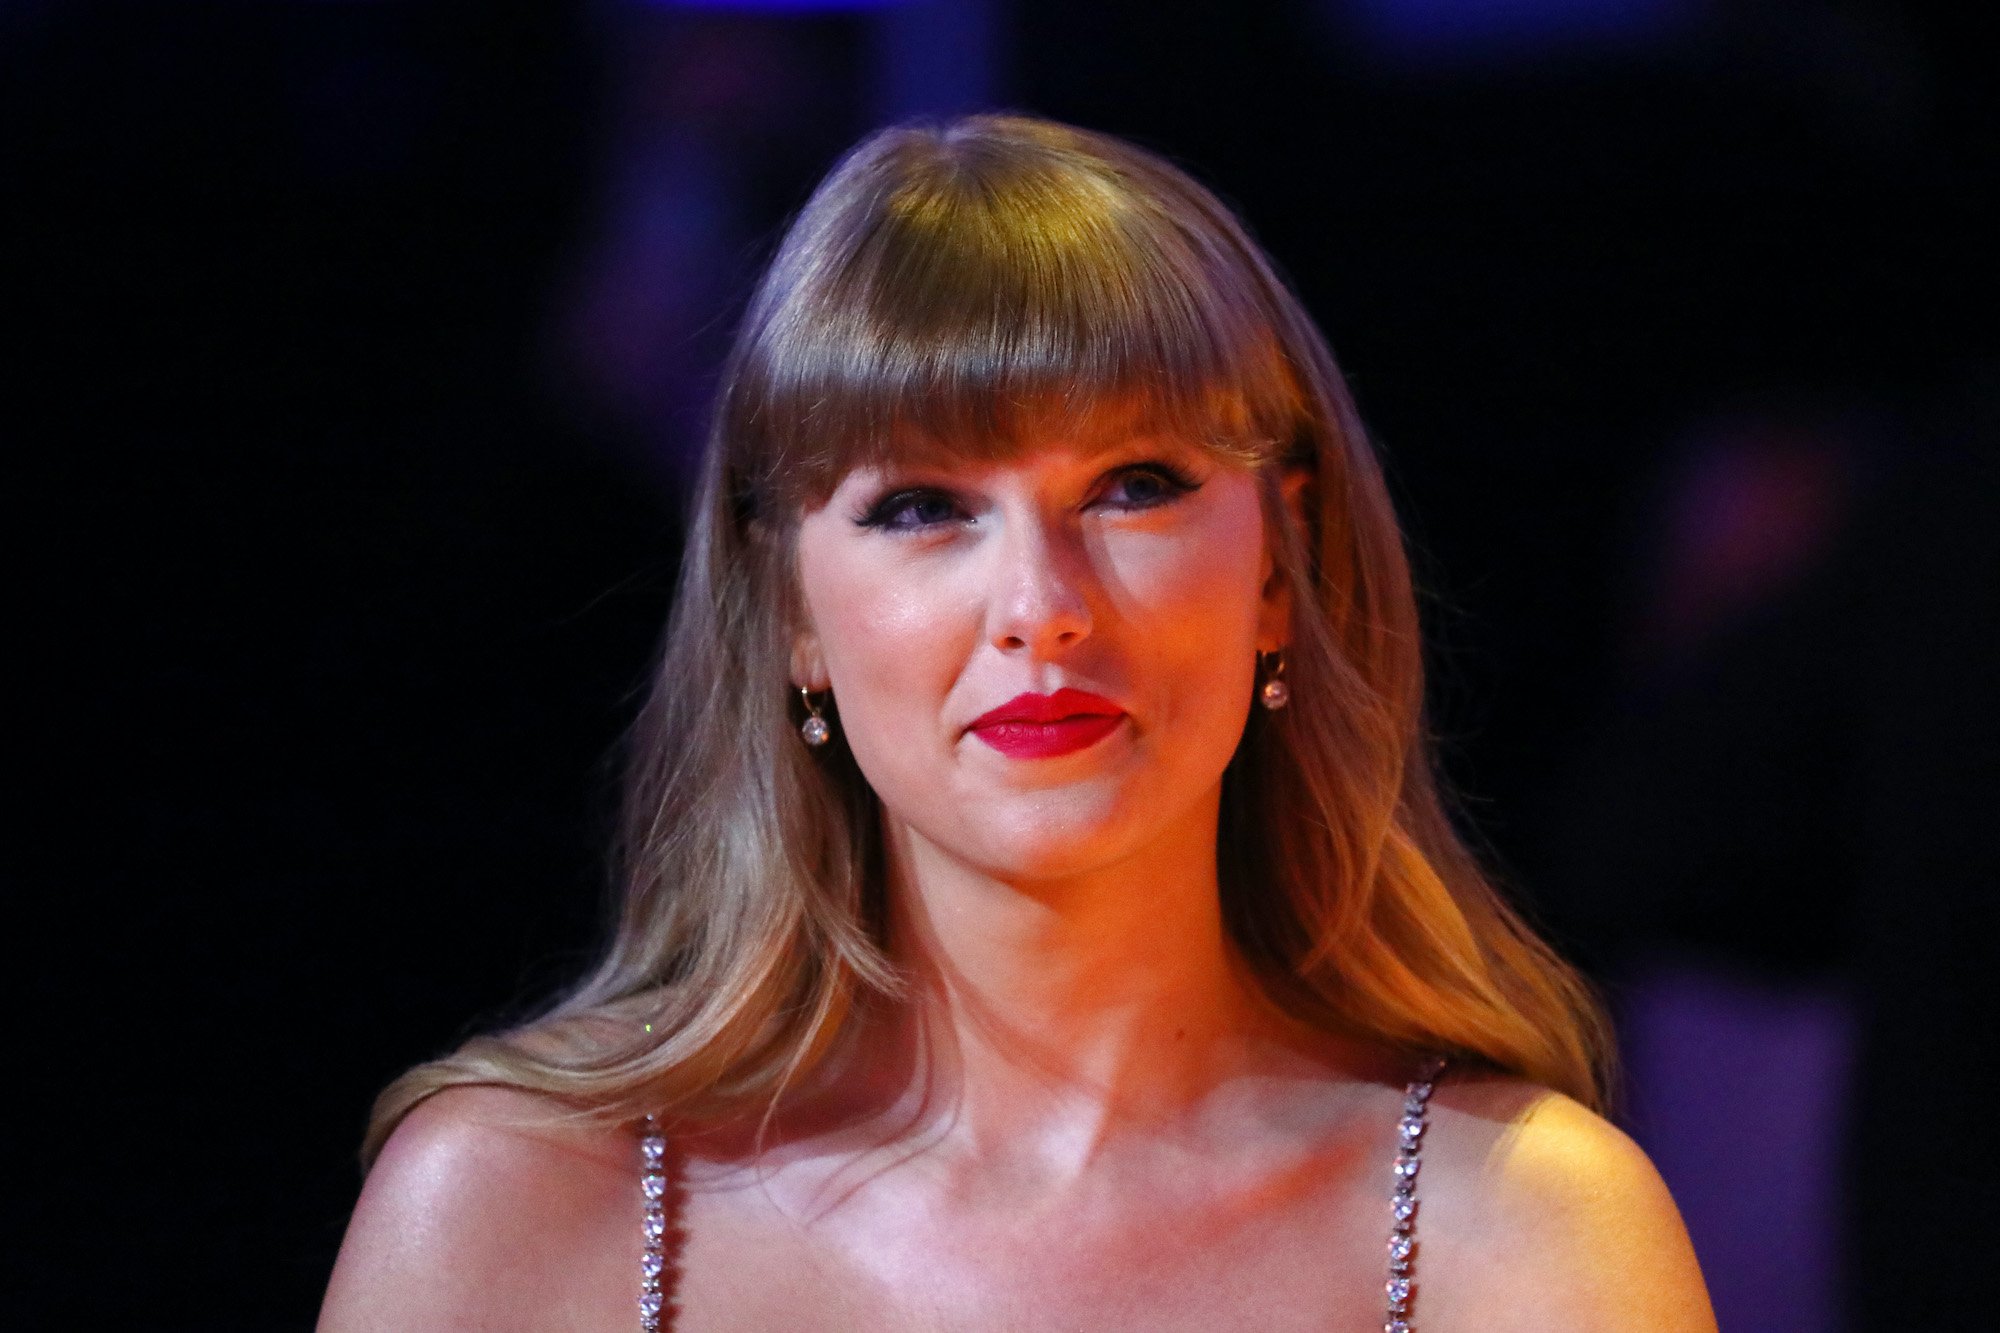 Taylor Swift, winner of the Global icon Award, at The BRIT Awards 2021 at The O2 Arena on May 11, 2021